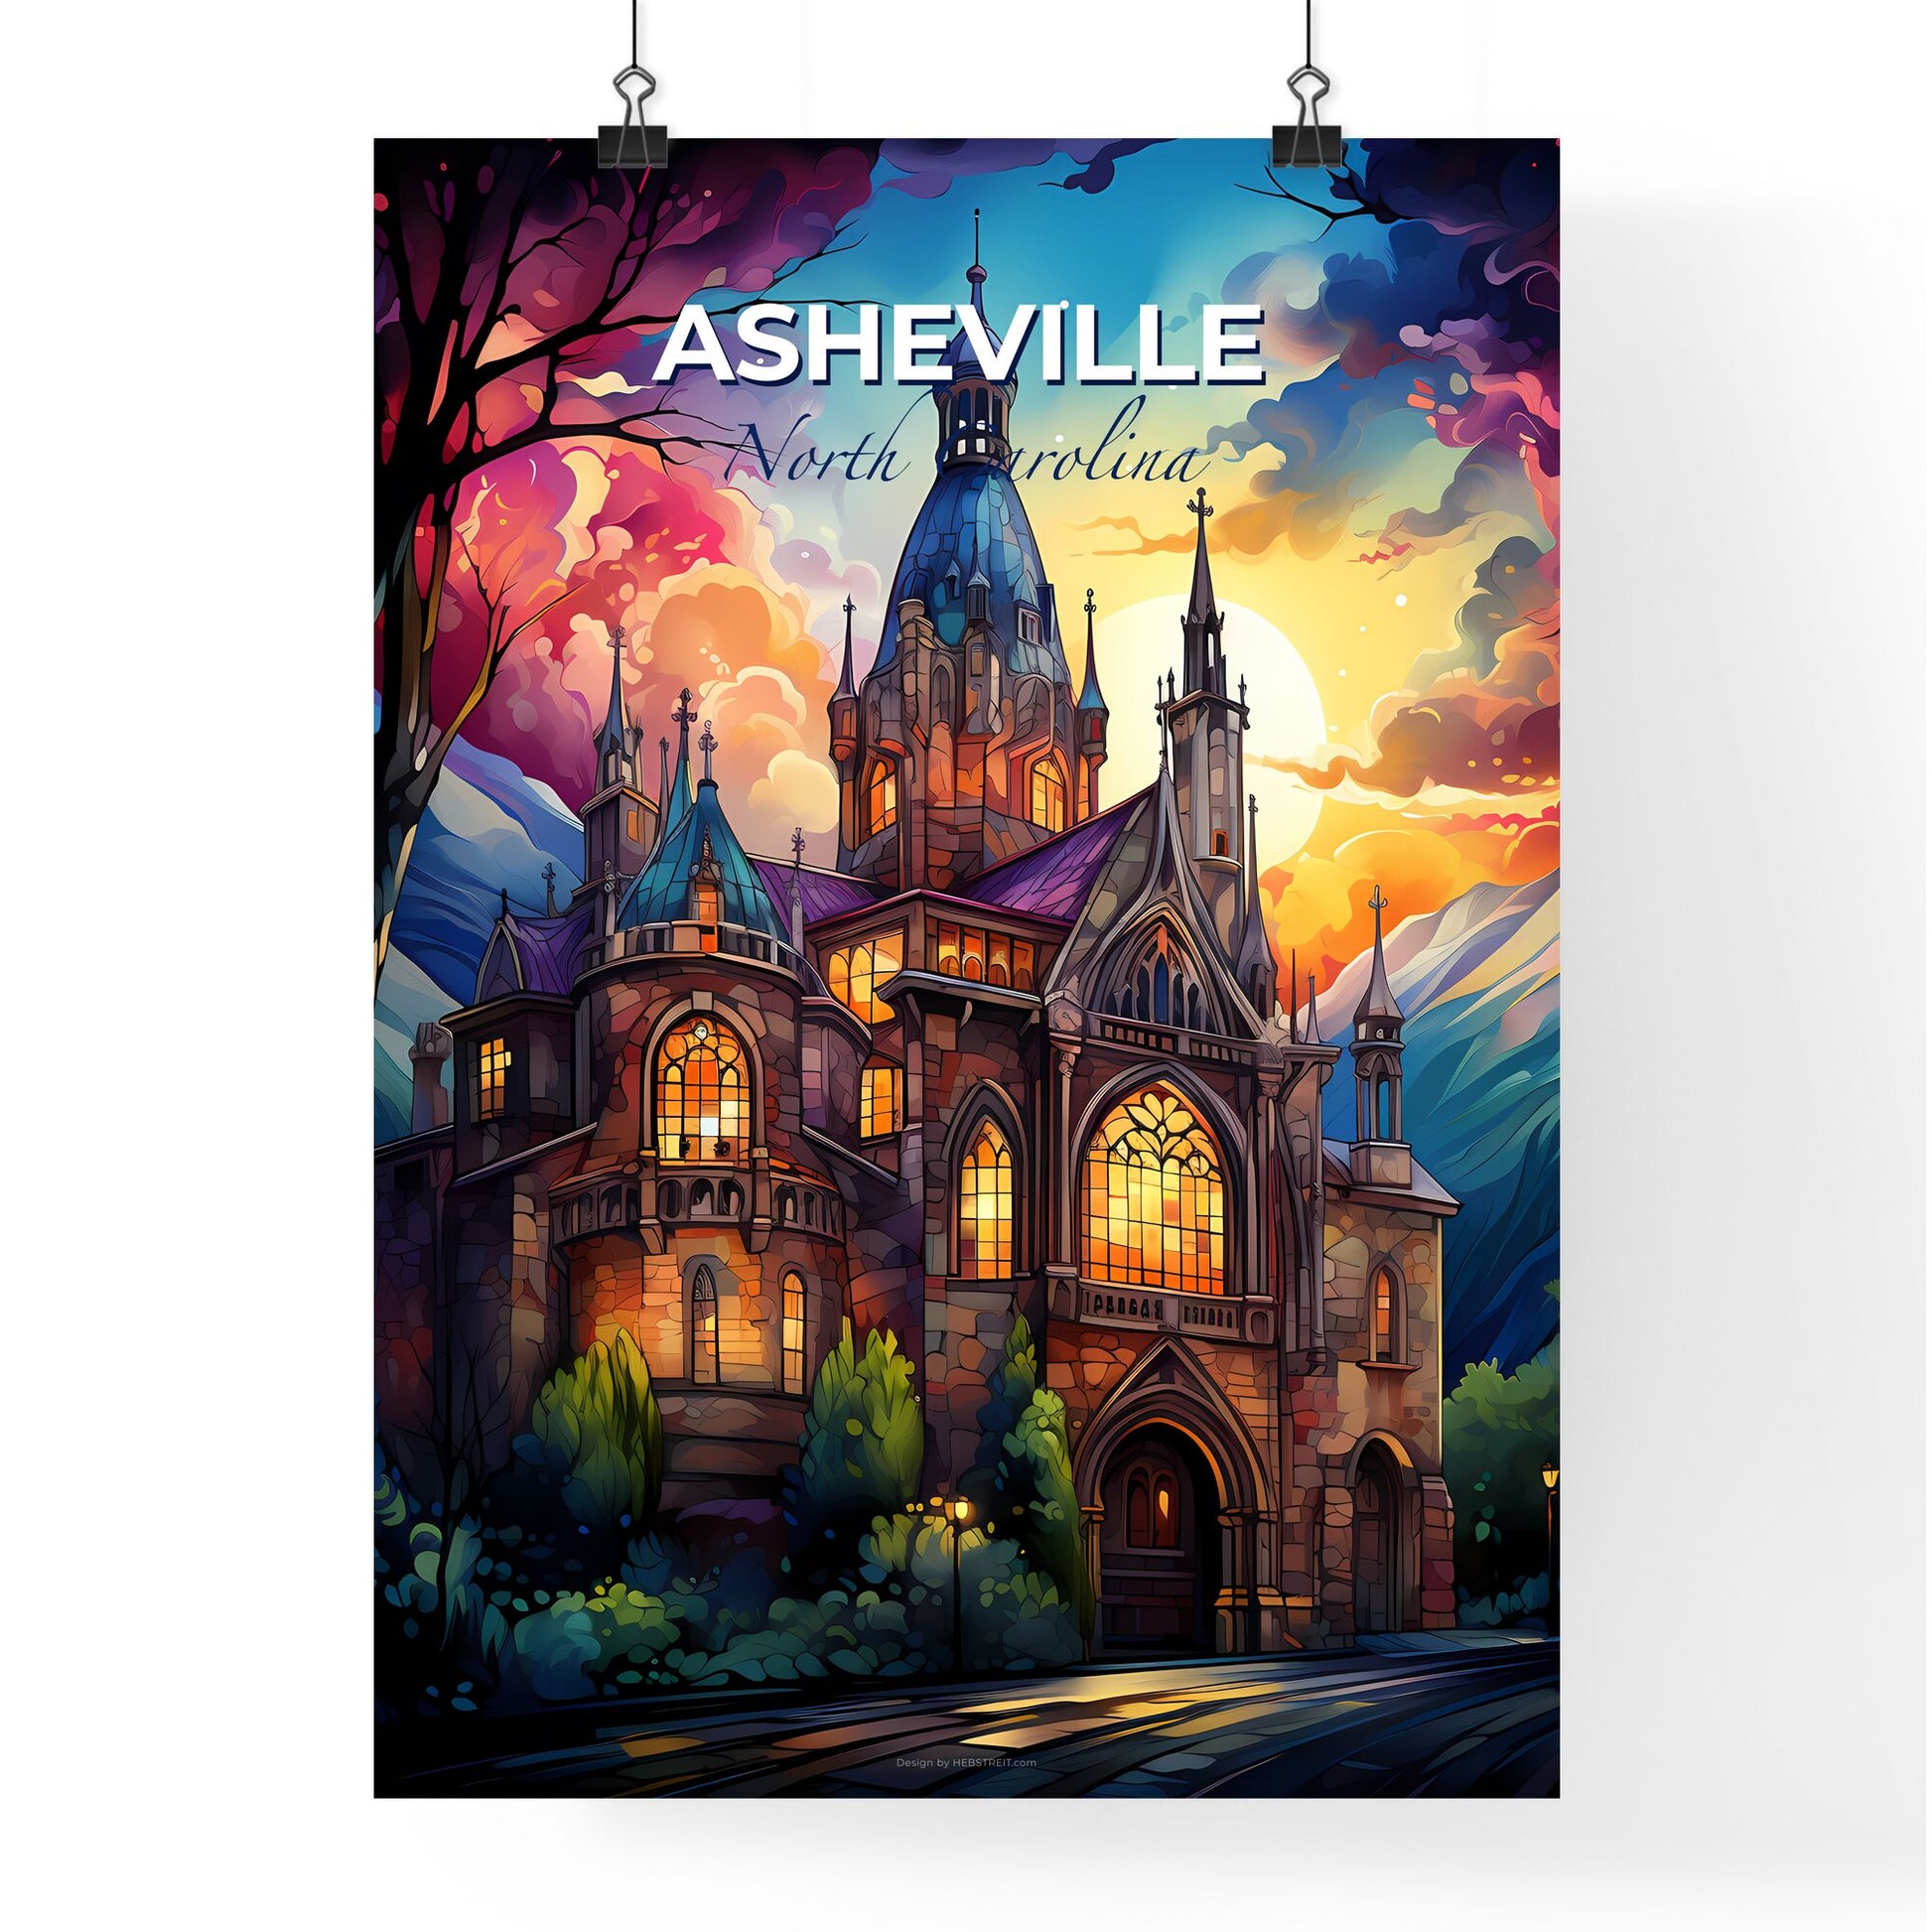 Asheville, North Carolina, A Poster of a painting of a castle with a colorful sky and trees Default Title